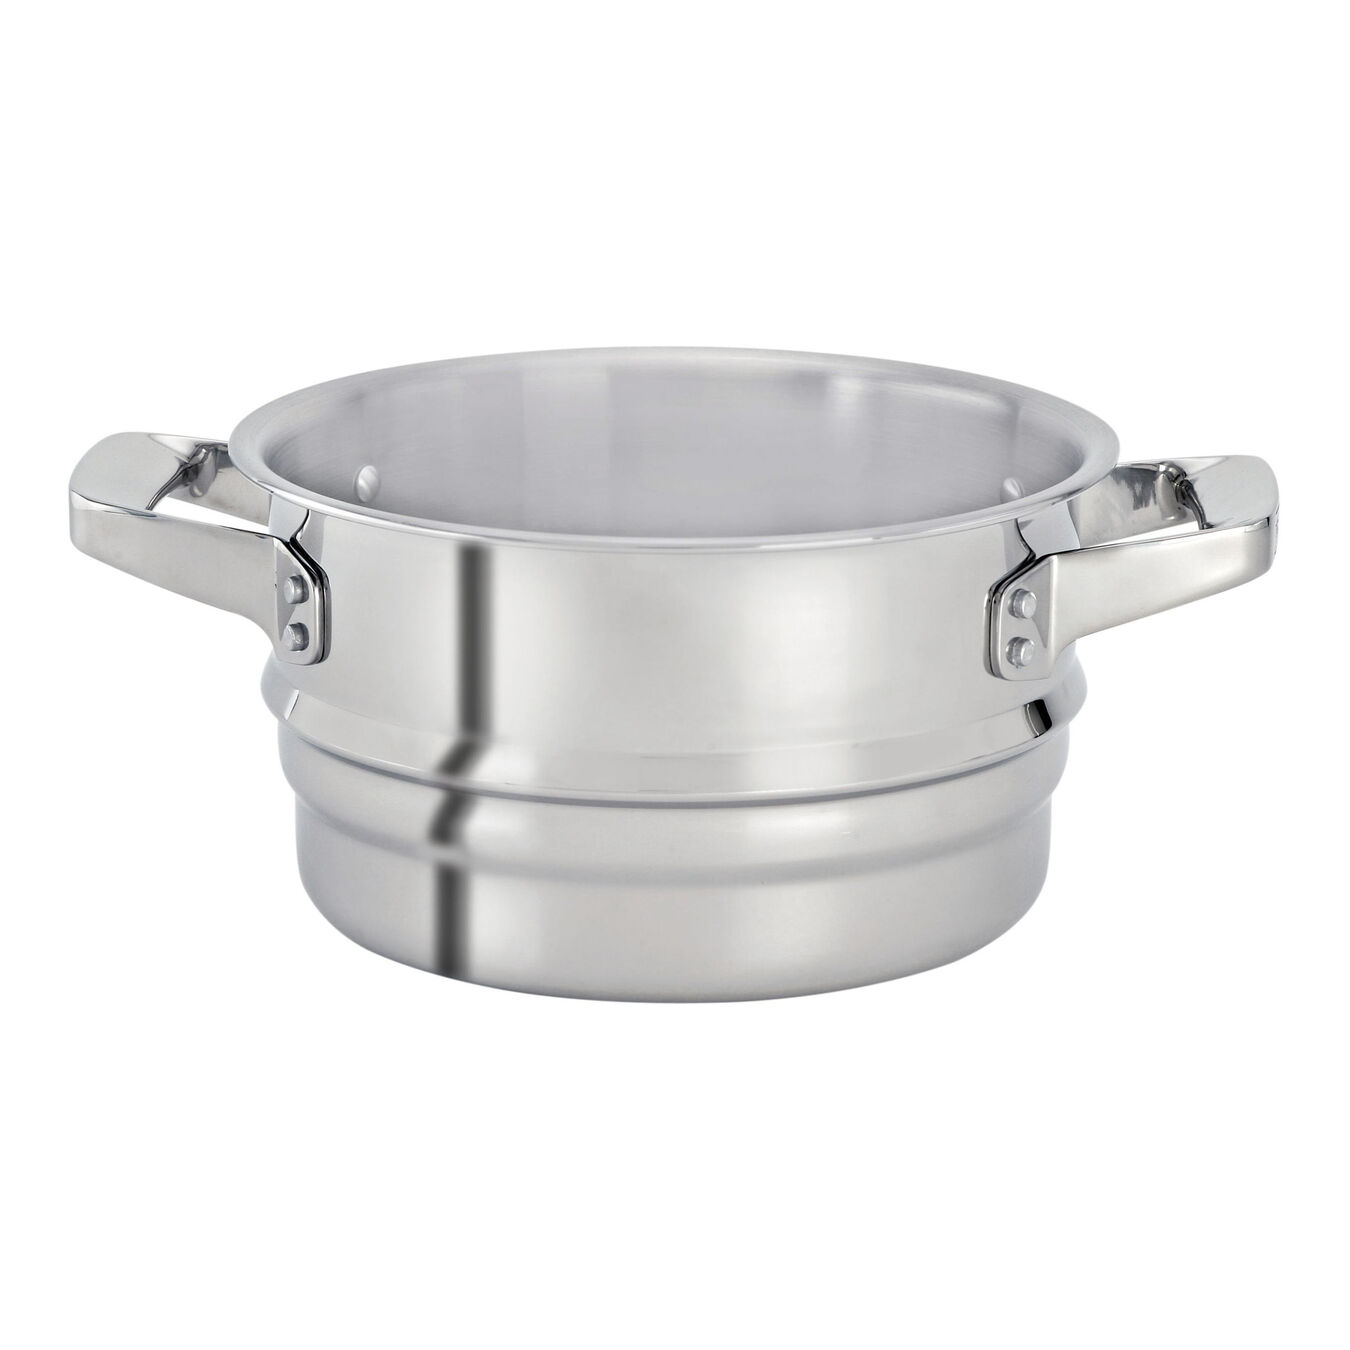 Double boiler,,large 1